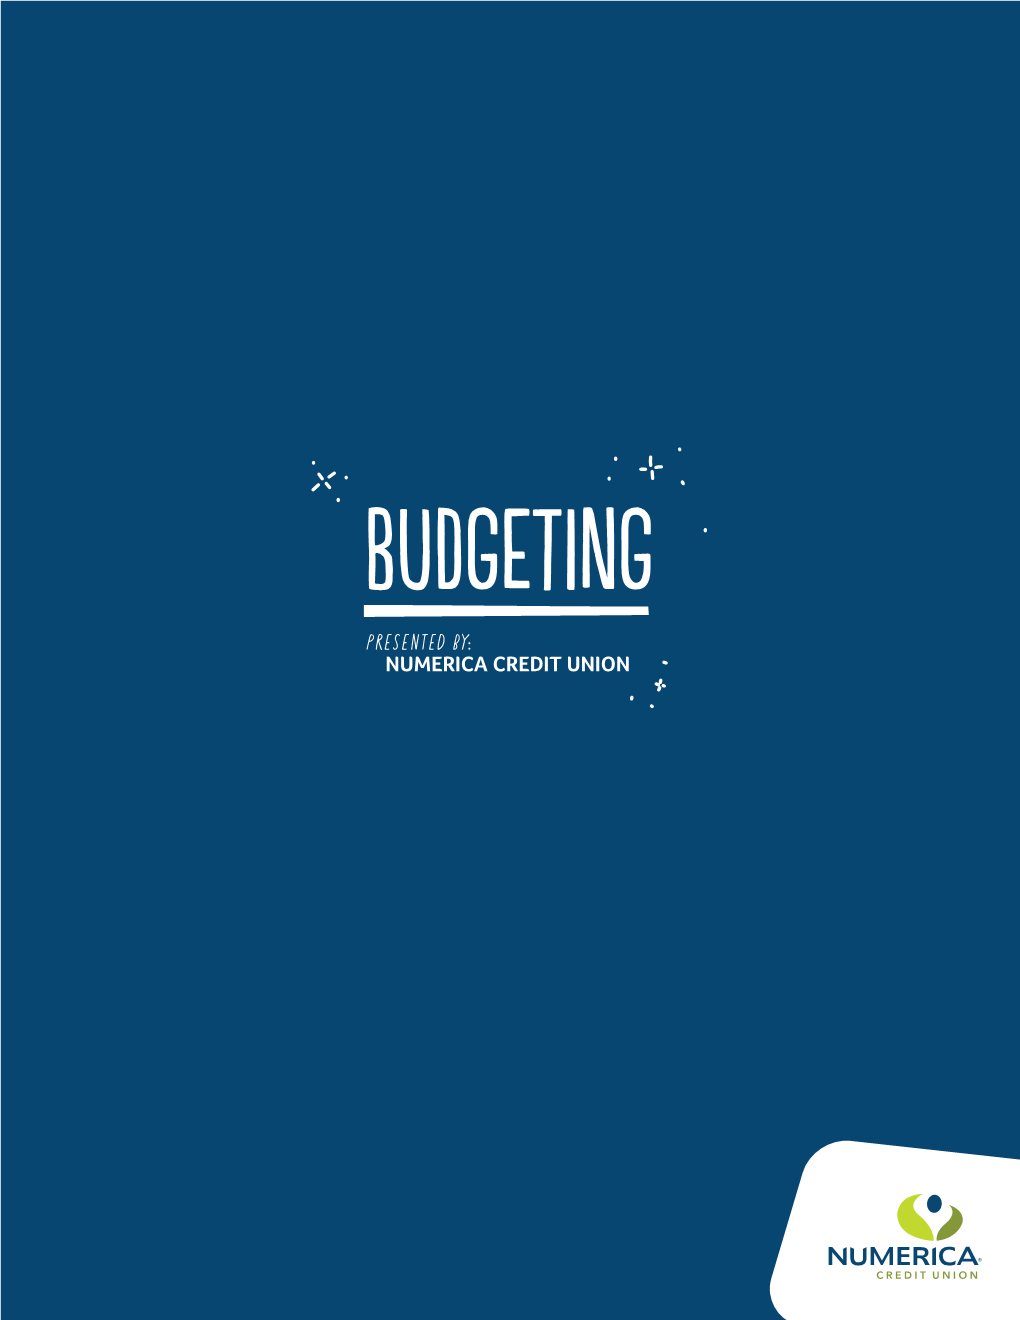 Budgeting PRESENTED BY: NUMERICA CREDIT UNION START at the BEGINNING MONTHLY INCOME & EXPENSES